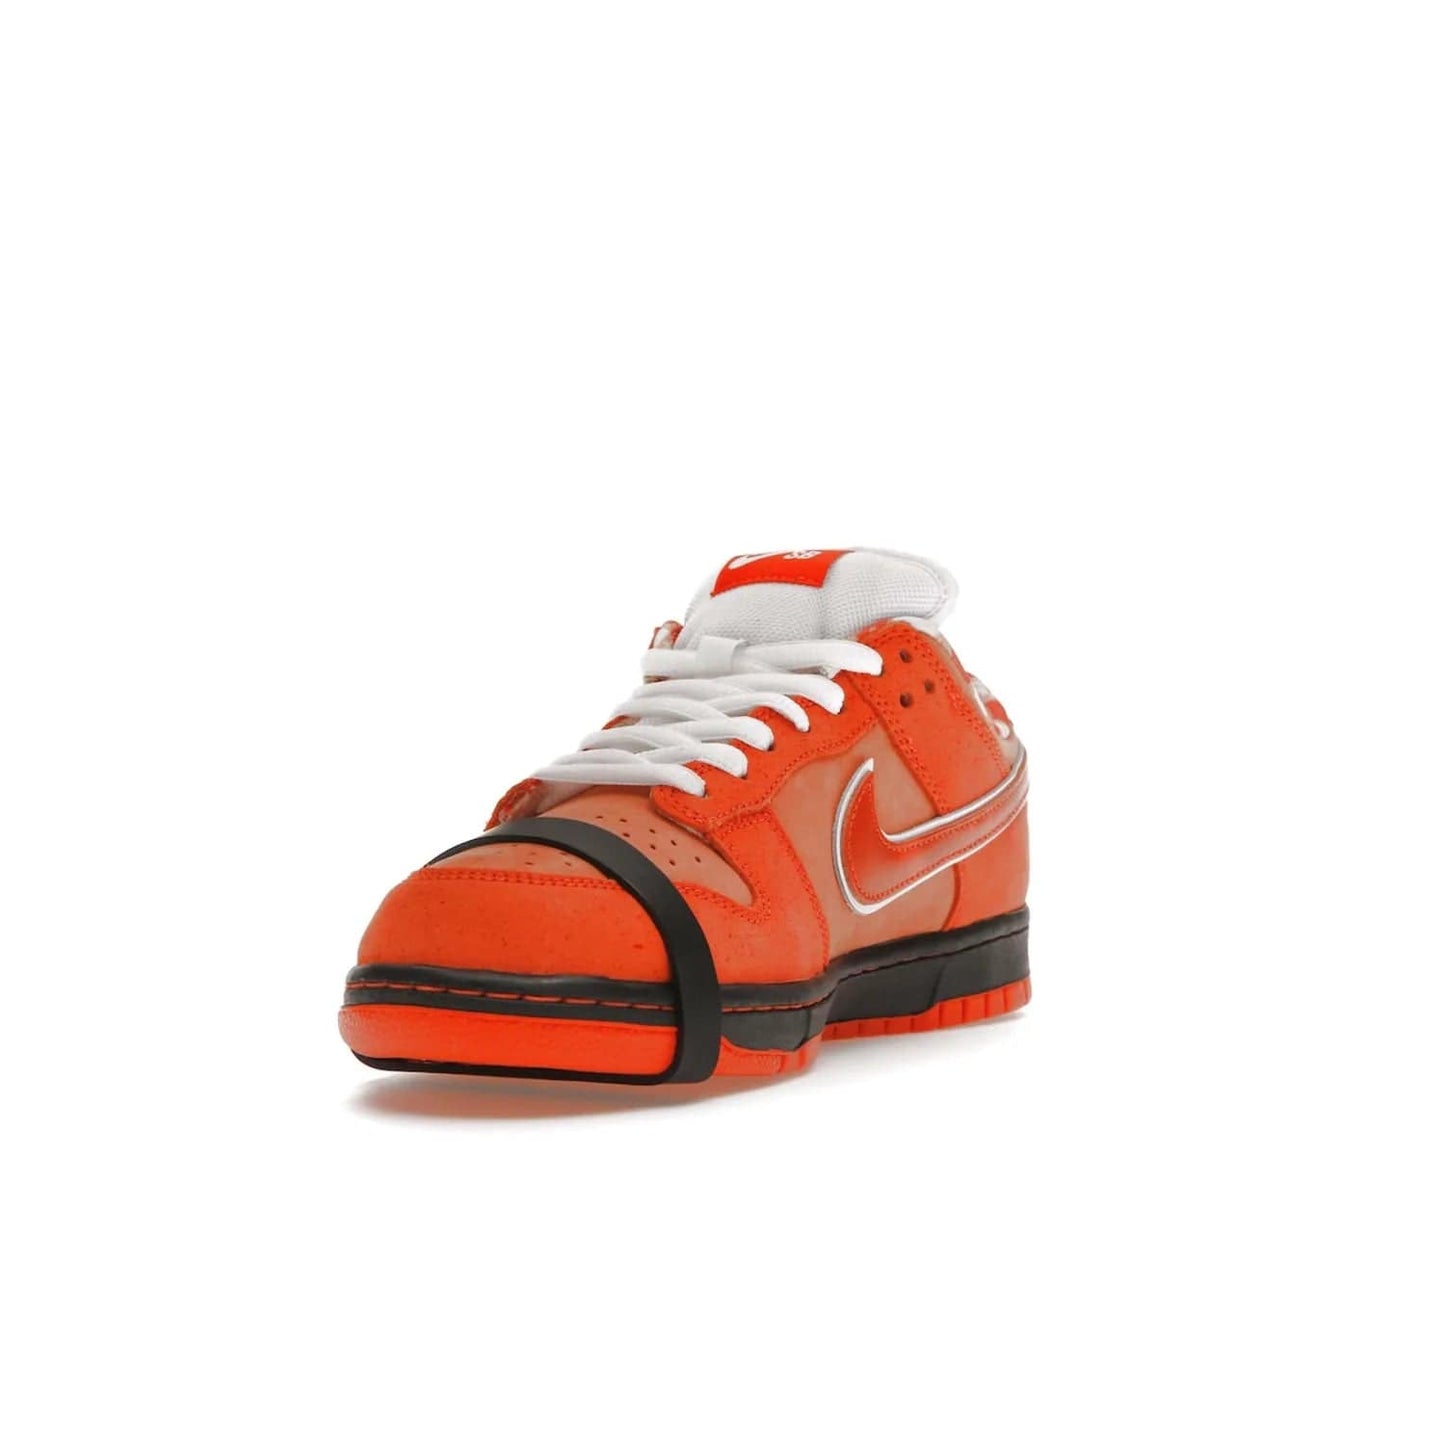 Nike SB Dunk Low Concepts Orange Lobster - Image 13 - Only at www.BallersClubKickz.com - Make a statement with the Nike SB Dunk Low Concepts Orange Lobster. Variety of orange hues, nubuck upper, bib-inspired lining & rubber outsole create bold look & comfortable blend of style. Available December 20th, 2022.